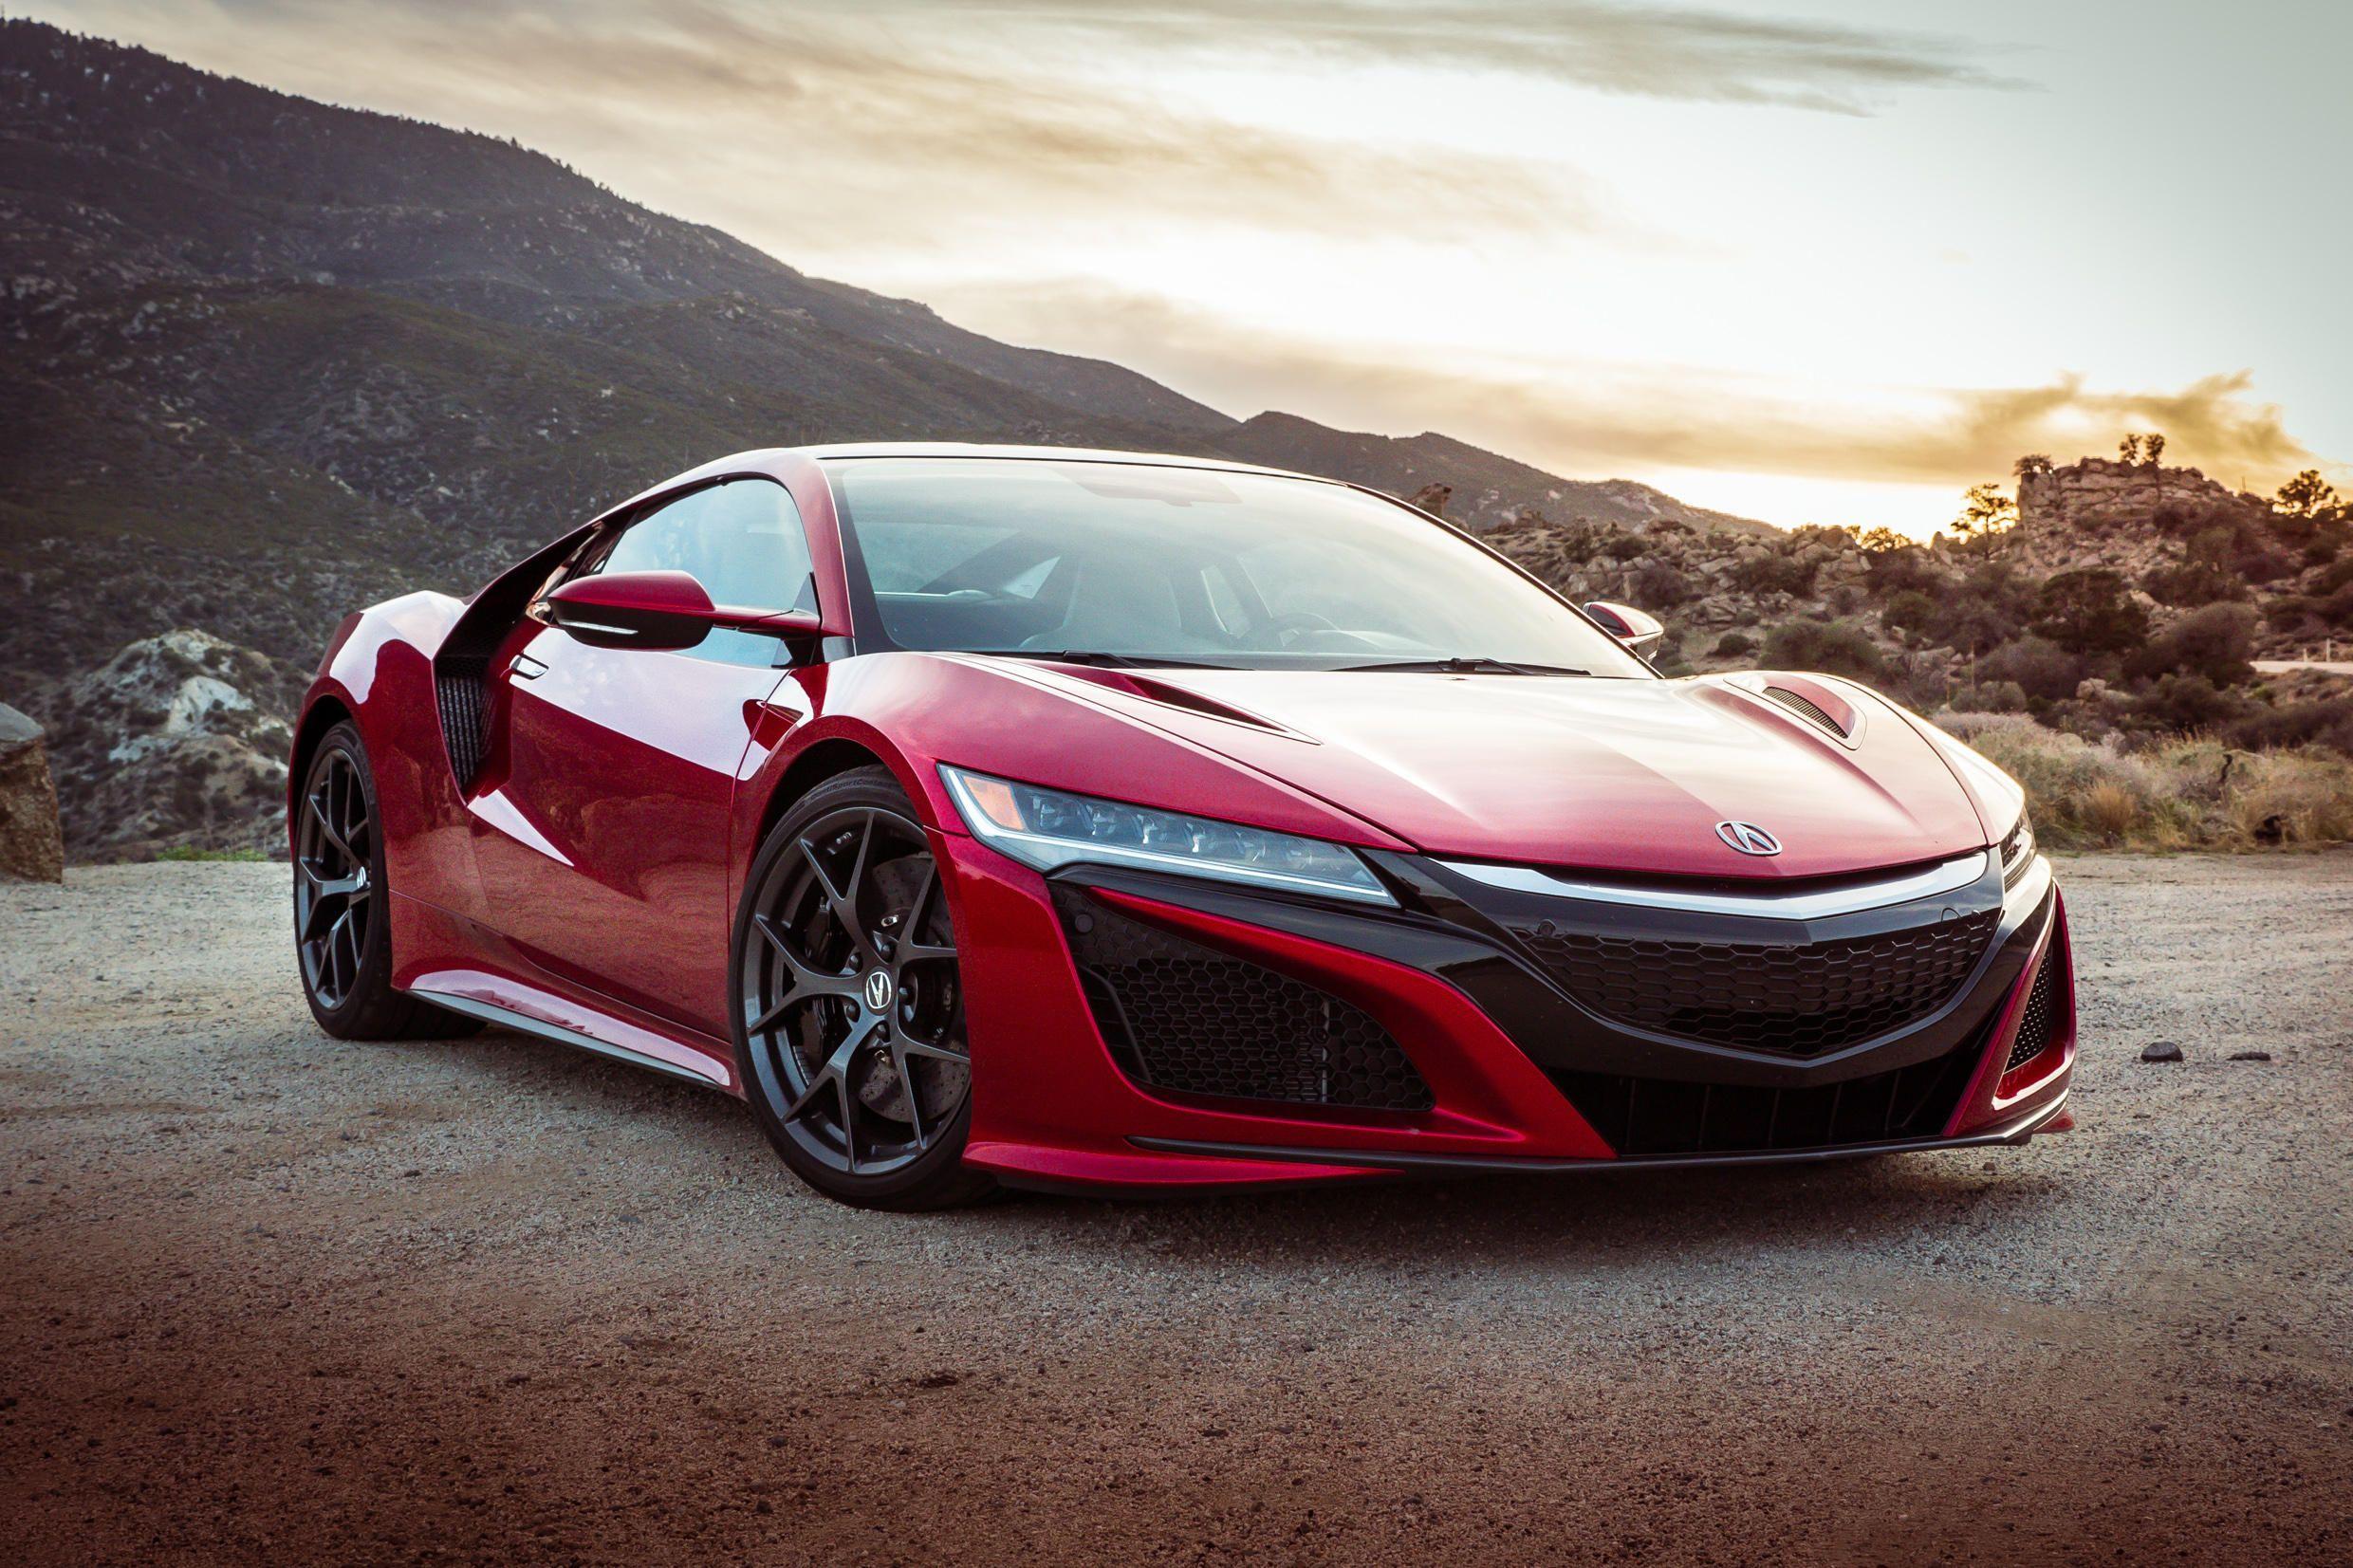 2017 Acura NSX Wallpapers - Wallpaper Cave